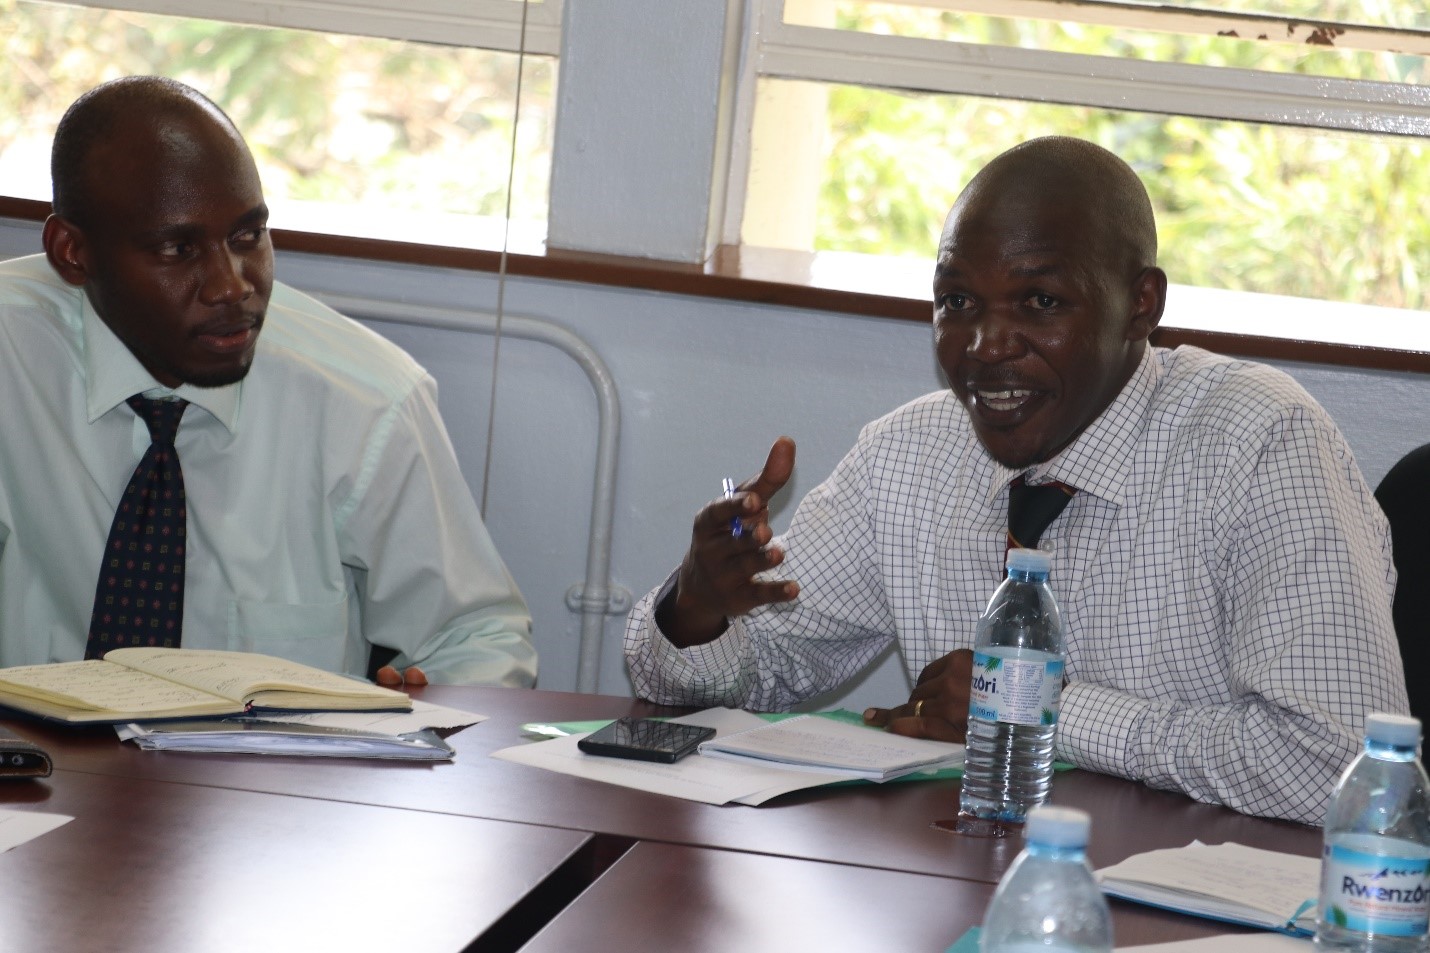 Dr. Freddy Kitutu (right) who will be leading the pharmacy side of the collaboration, speaking in the meeting. Left is Dr. David Musoke, the Project Lead from the Ugandan side.